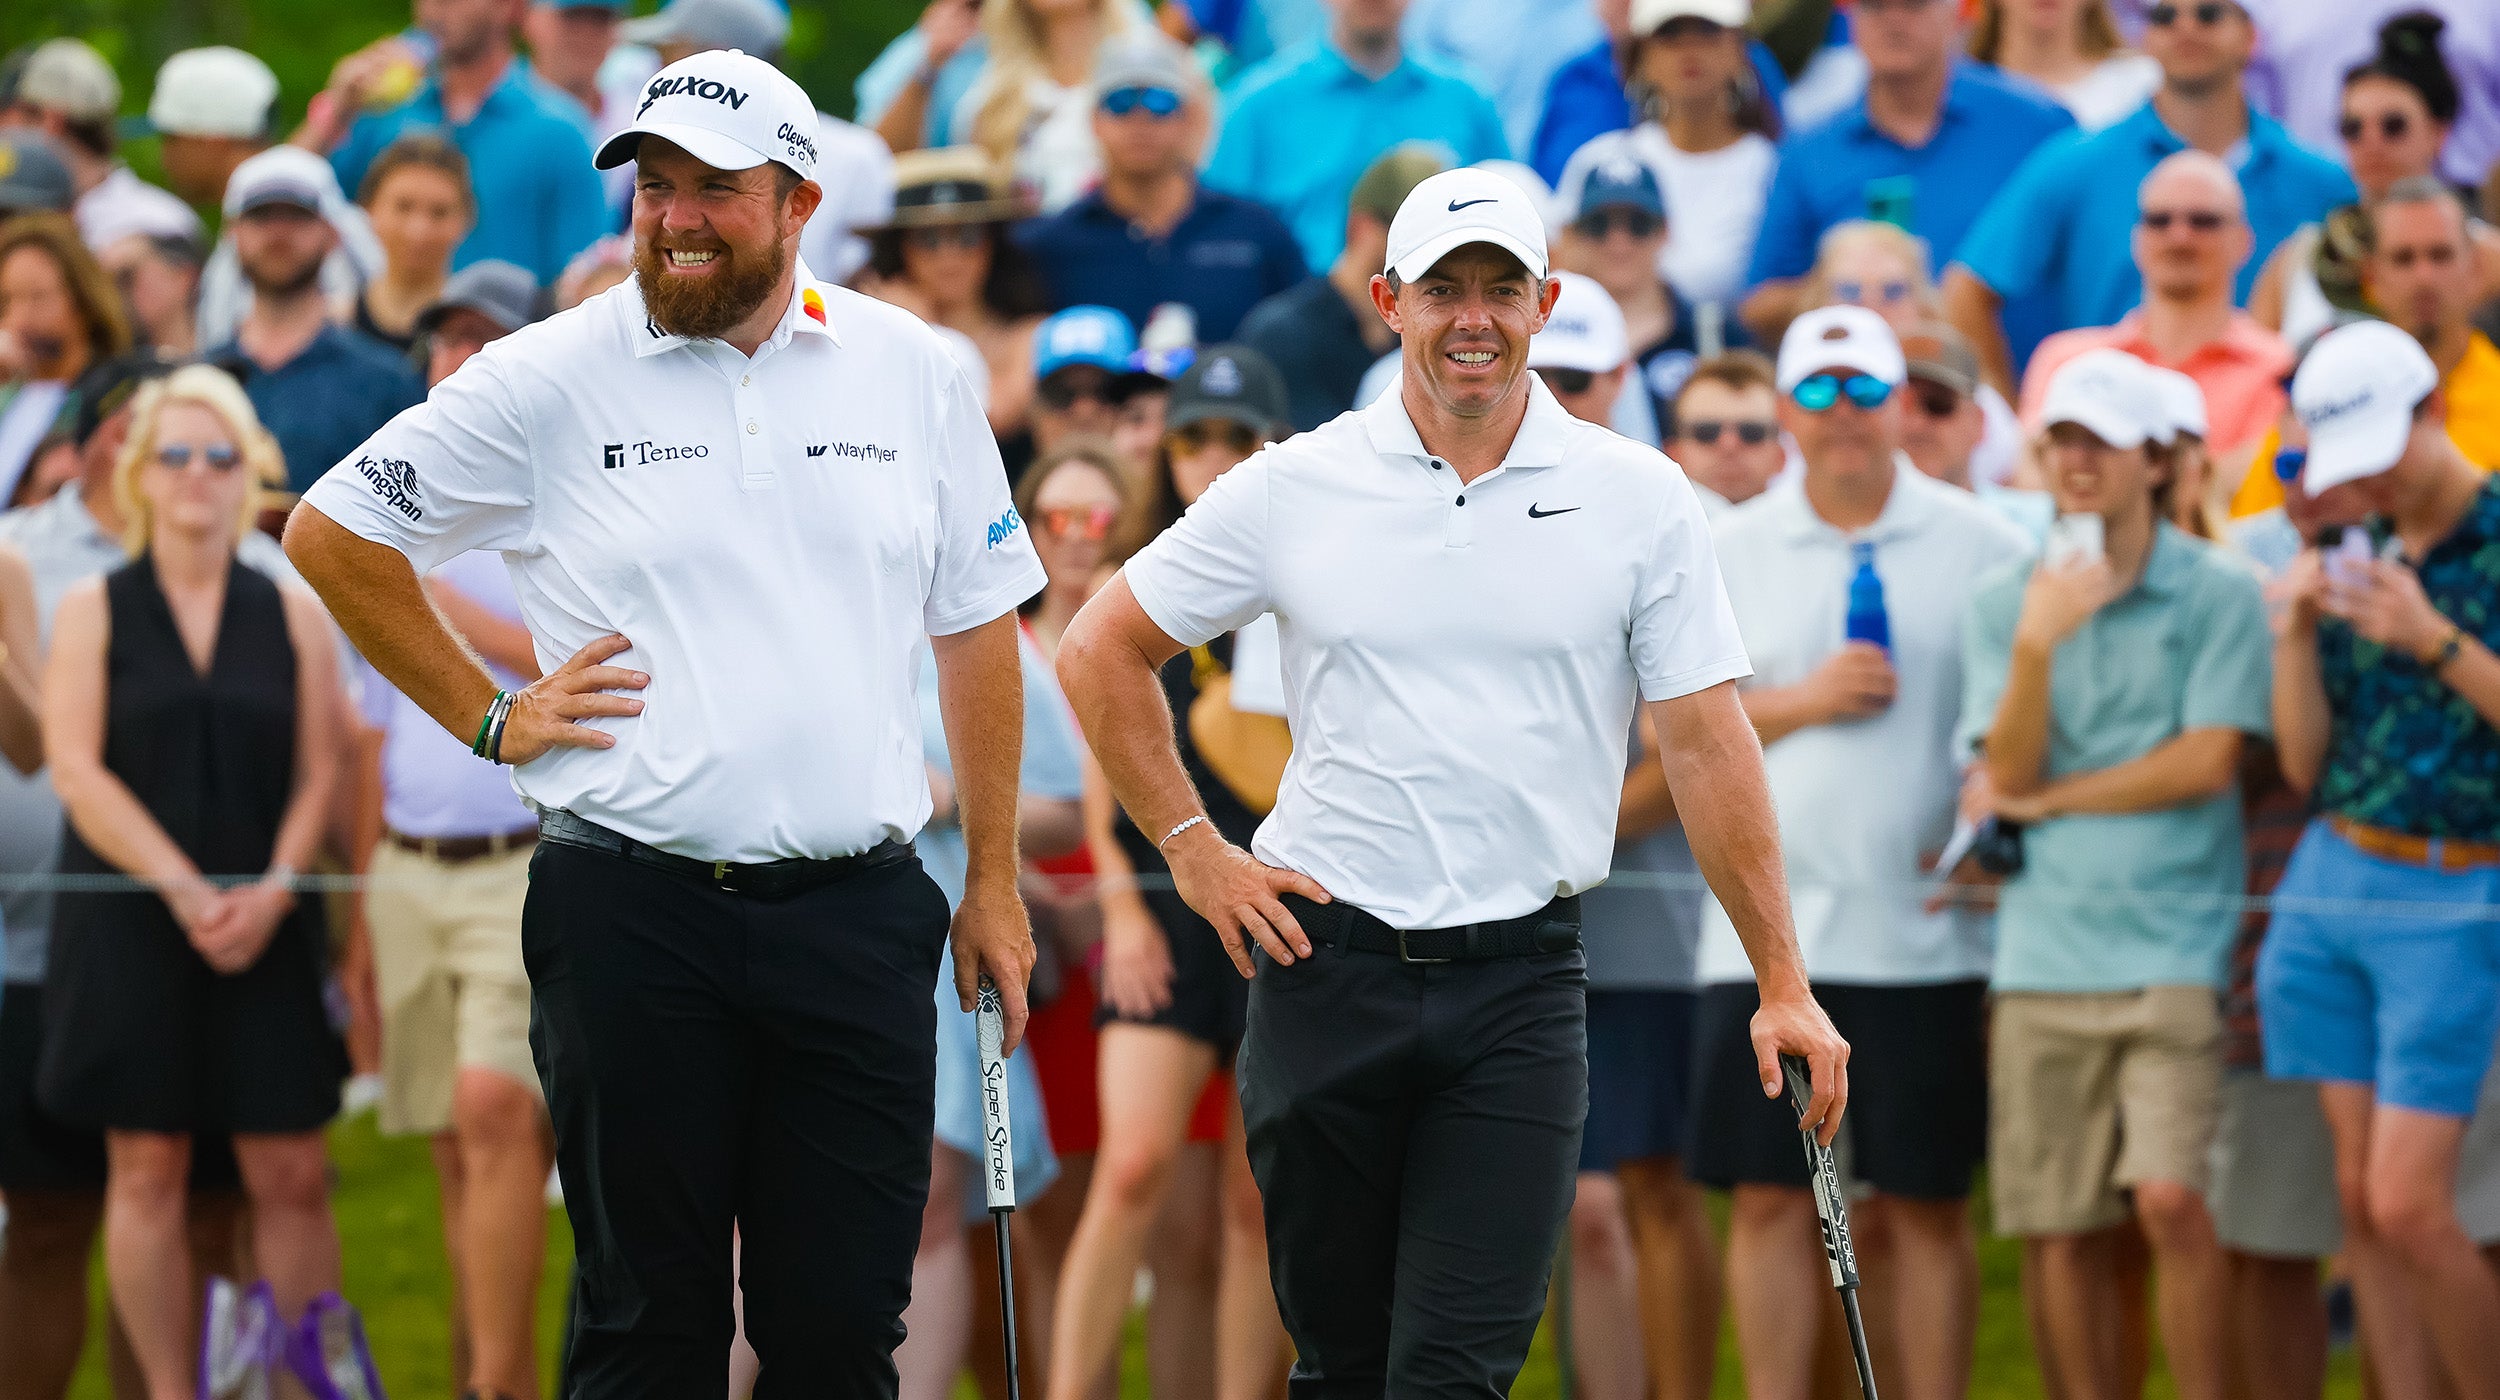 Rory McIlroy and Shane Lowry Earn Zurich Classic Win with Pistol Grips